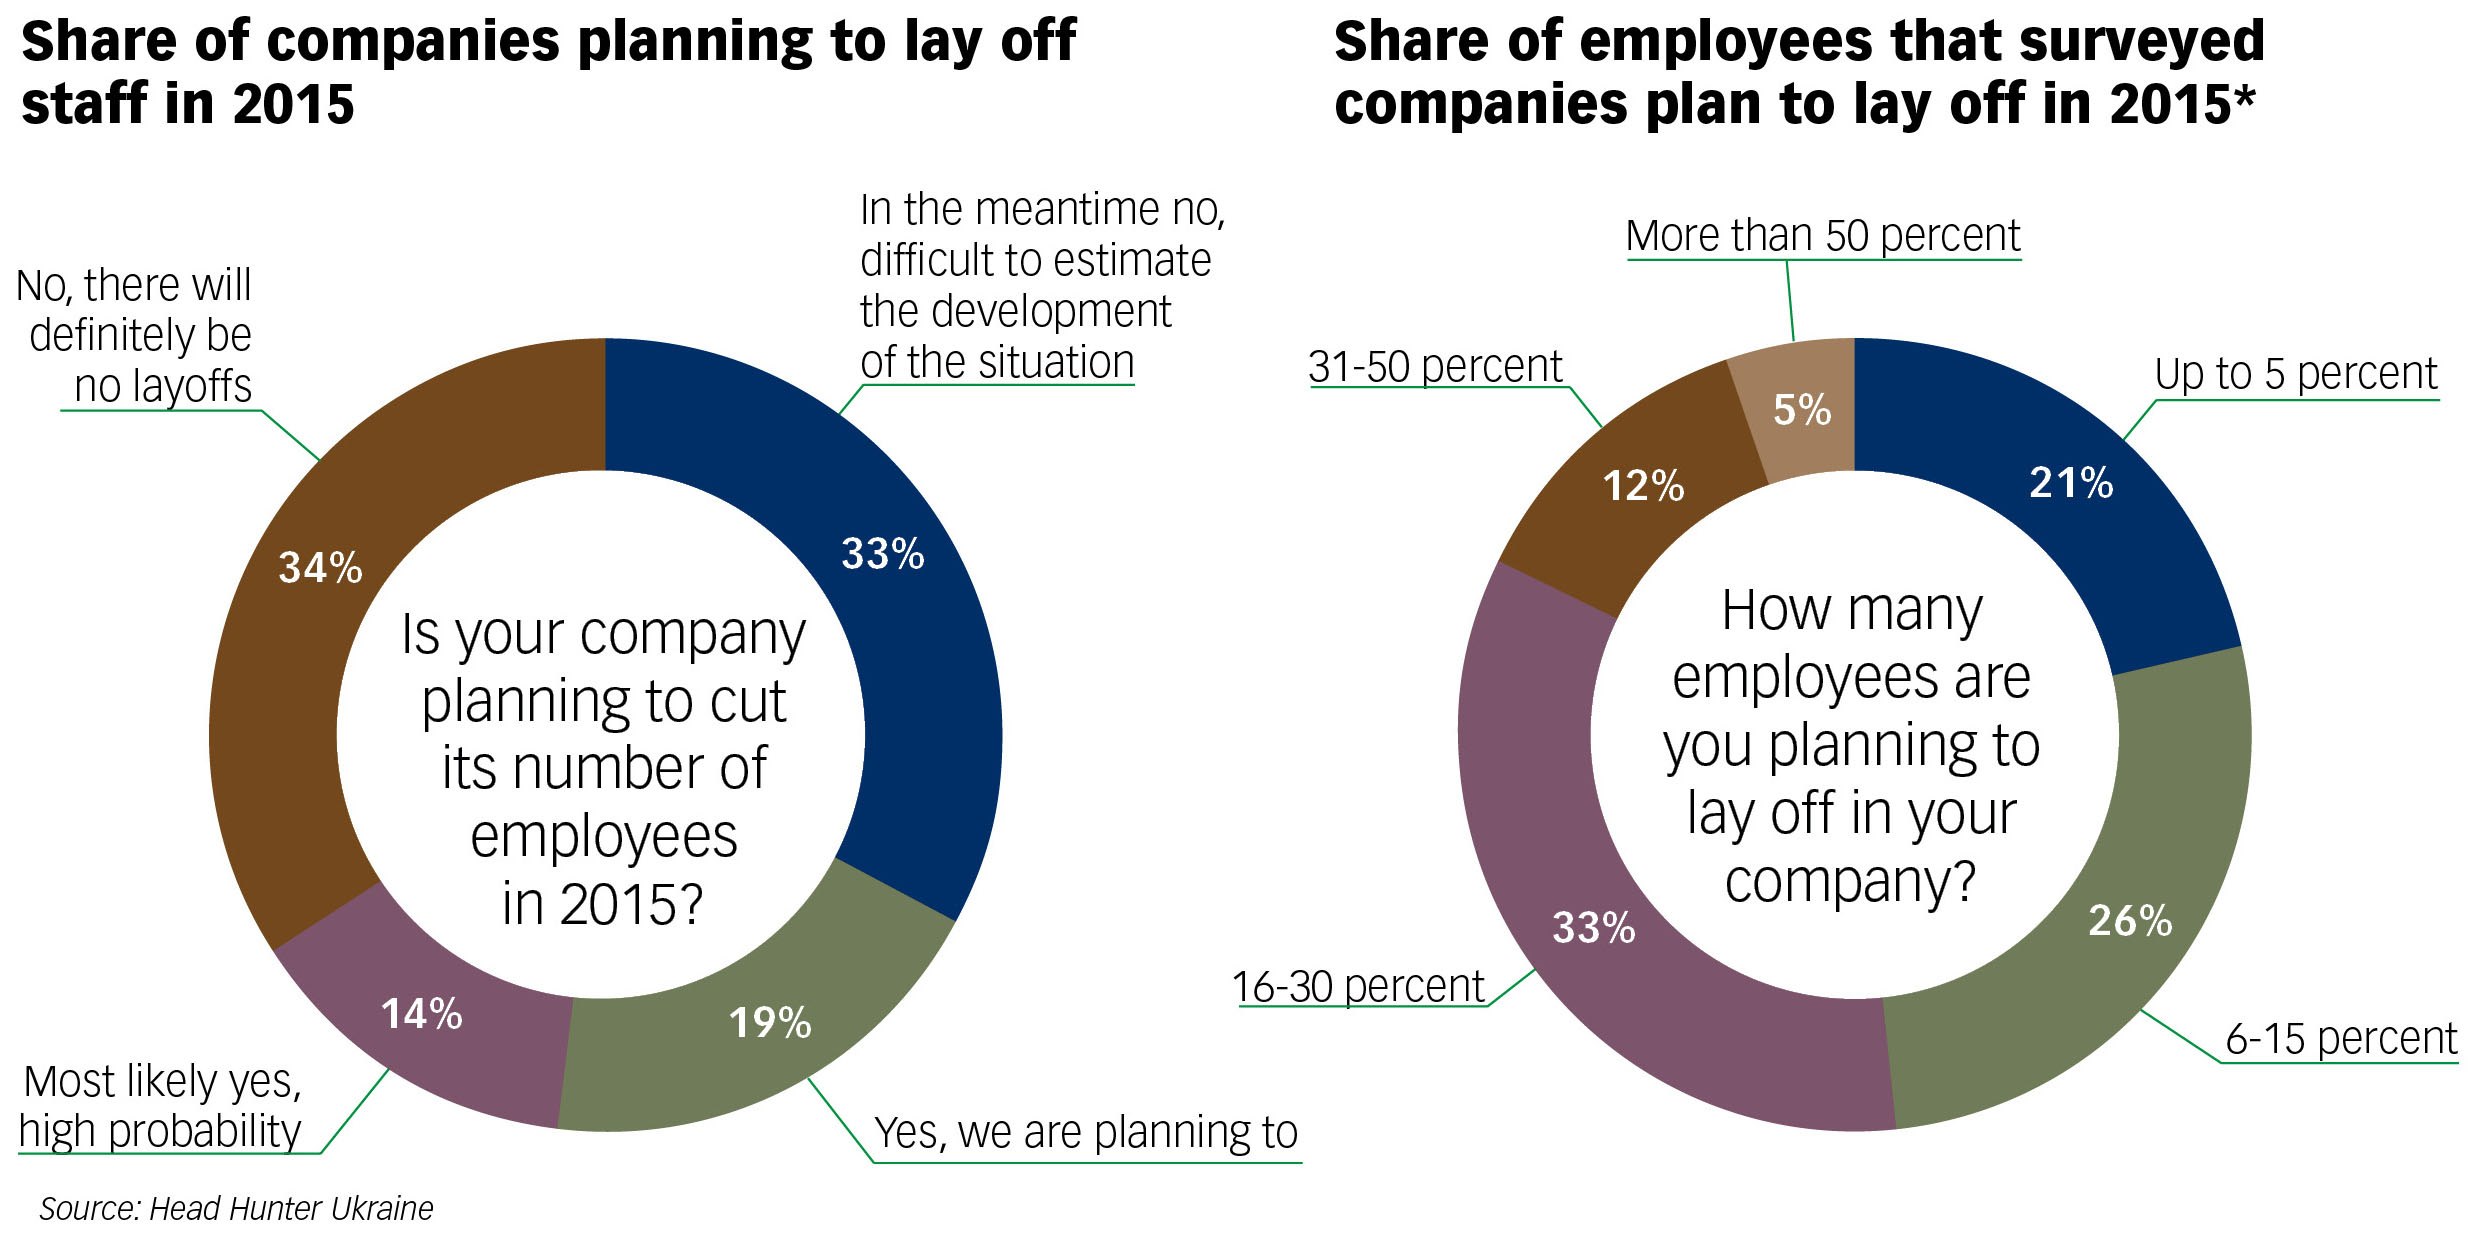 One third of surveyed white-collar employees say that they fear losing their job, according to hh.ua, a Ukrainian human resources firm. One third of employers say that they will need to let go of 16-30 percent of their staff. *This graph only includes com